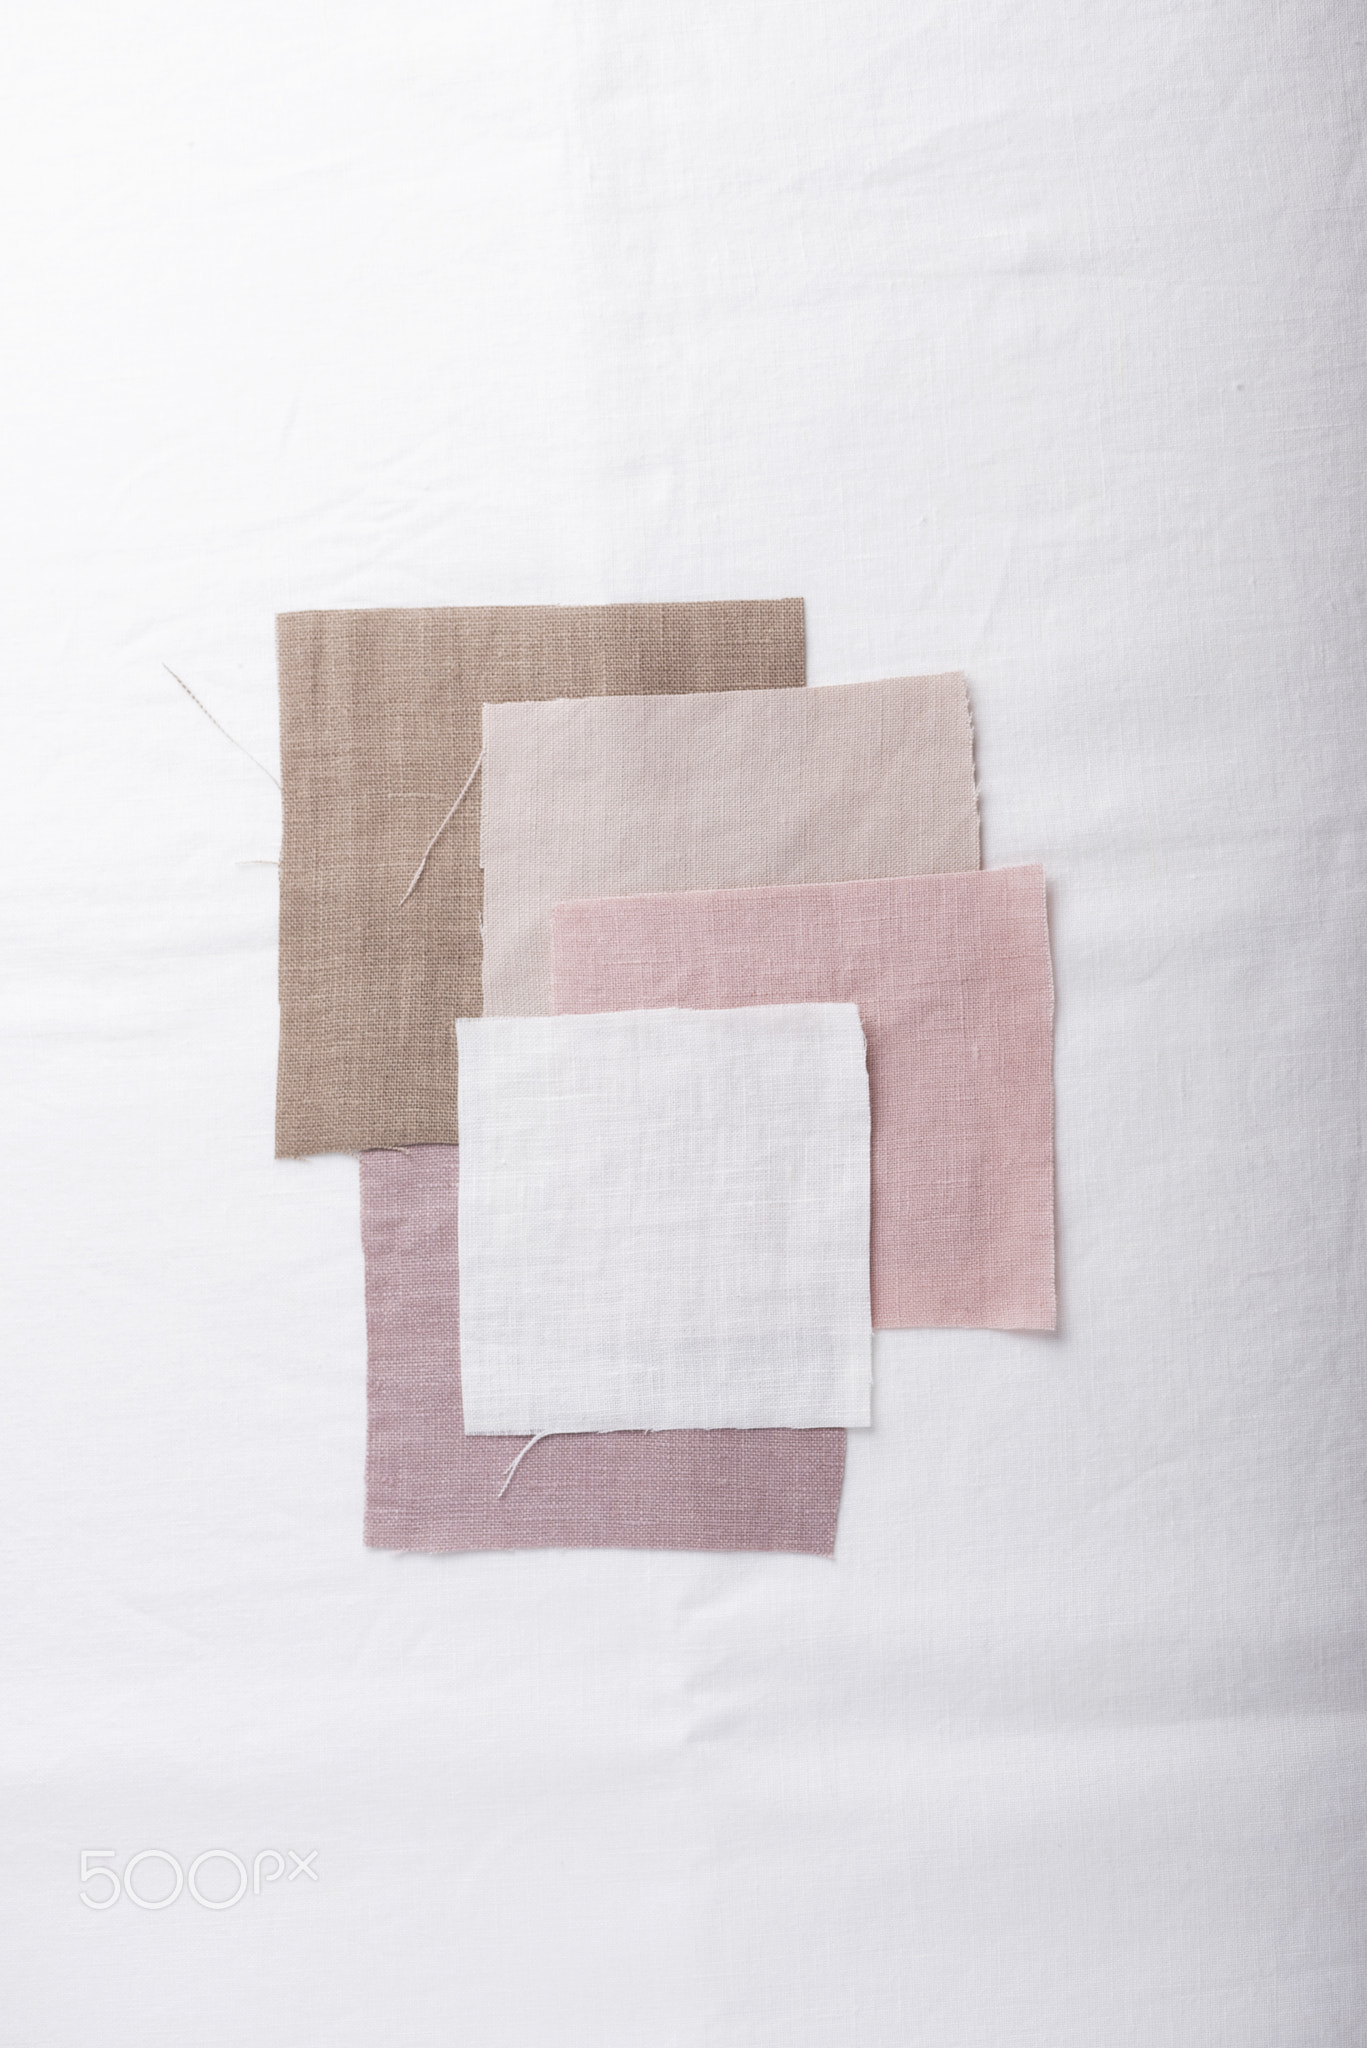 Linen fabric samples in pastel colors